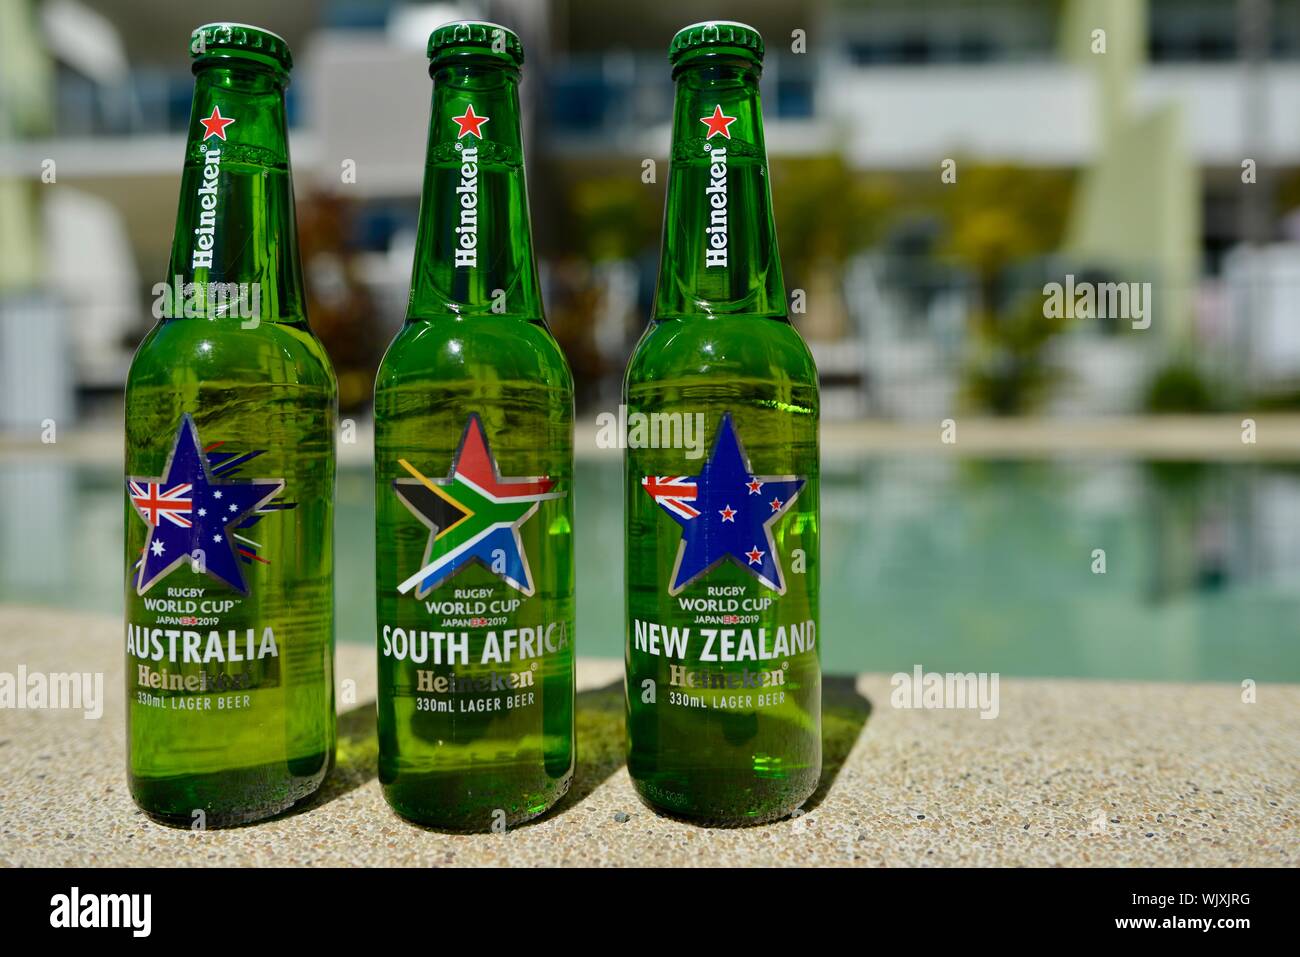 South africa, New Zealand and Australia, Heineken 2019 Japan Rugby world cup beer bottles Stock Photo